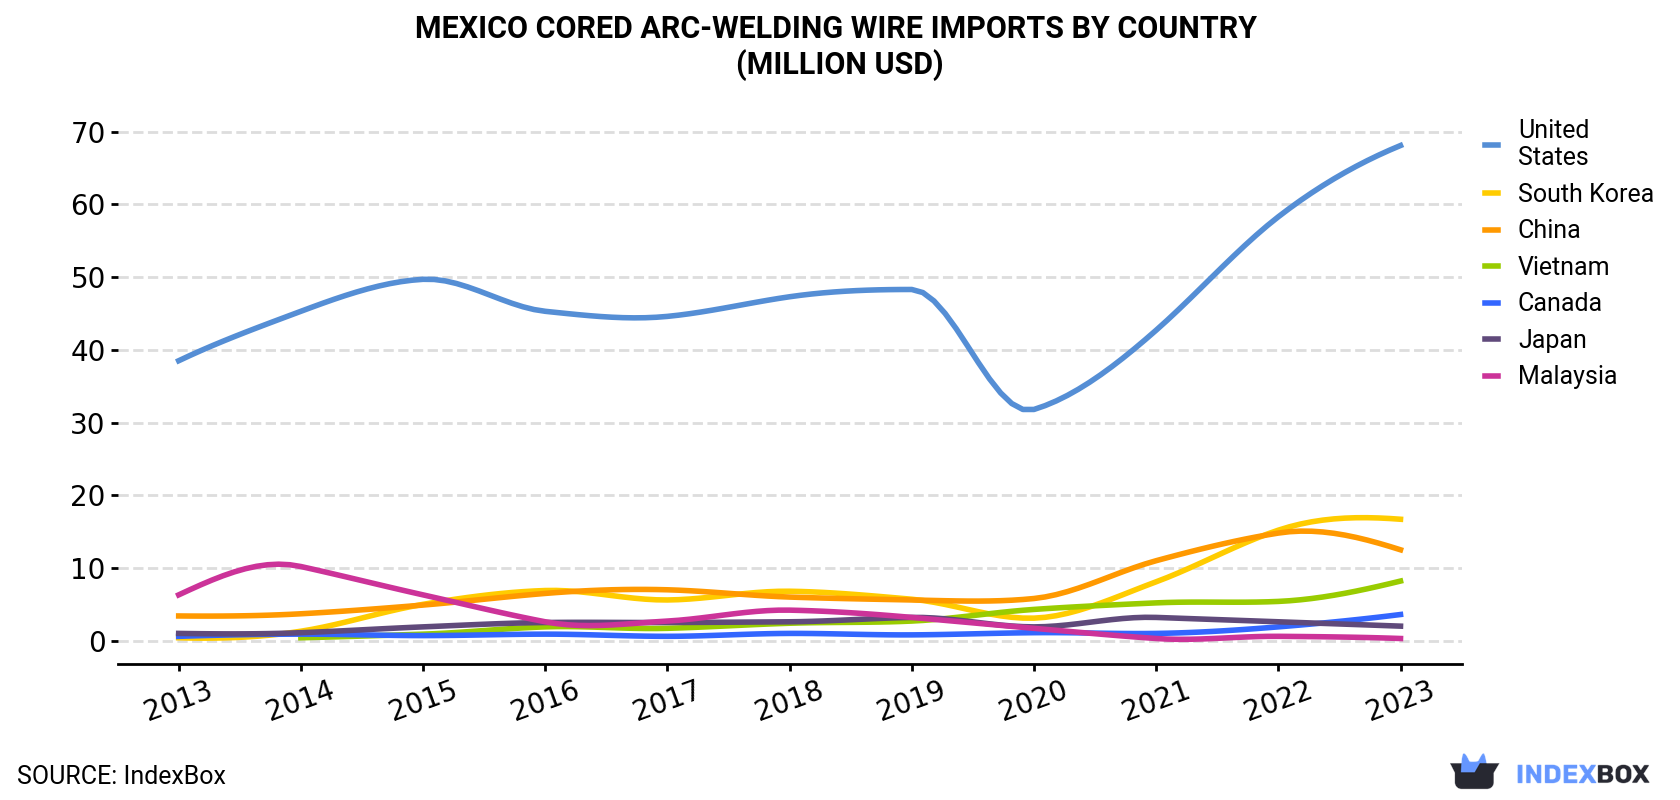 Mexico Cored Arc-Welding Wire Imports By Country (Million USD)